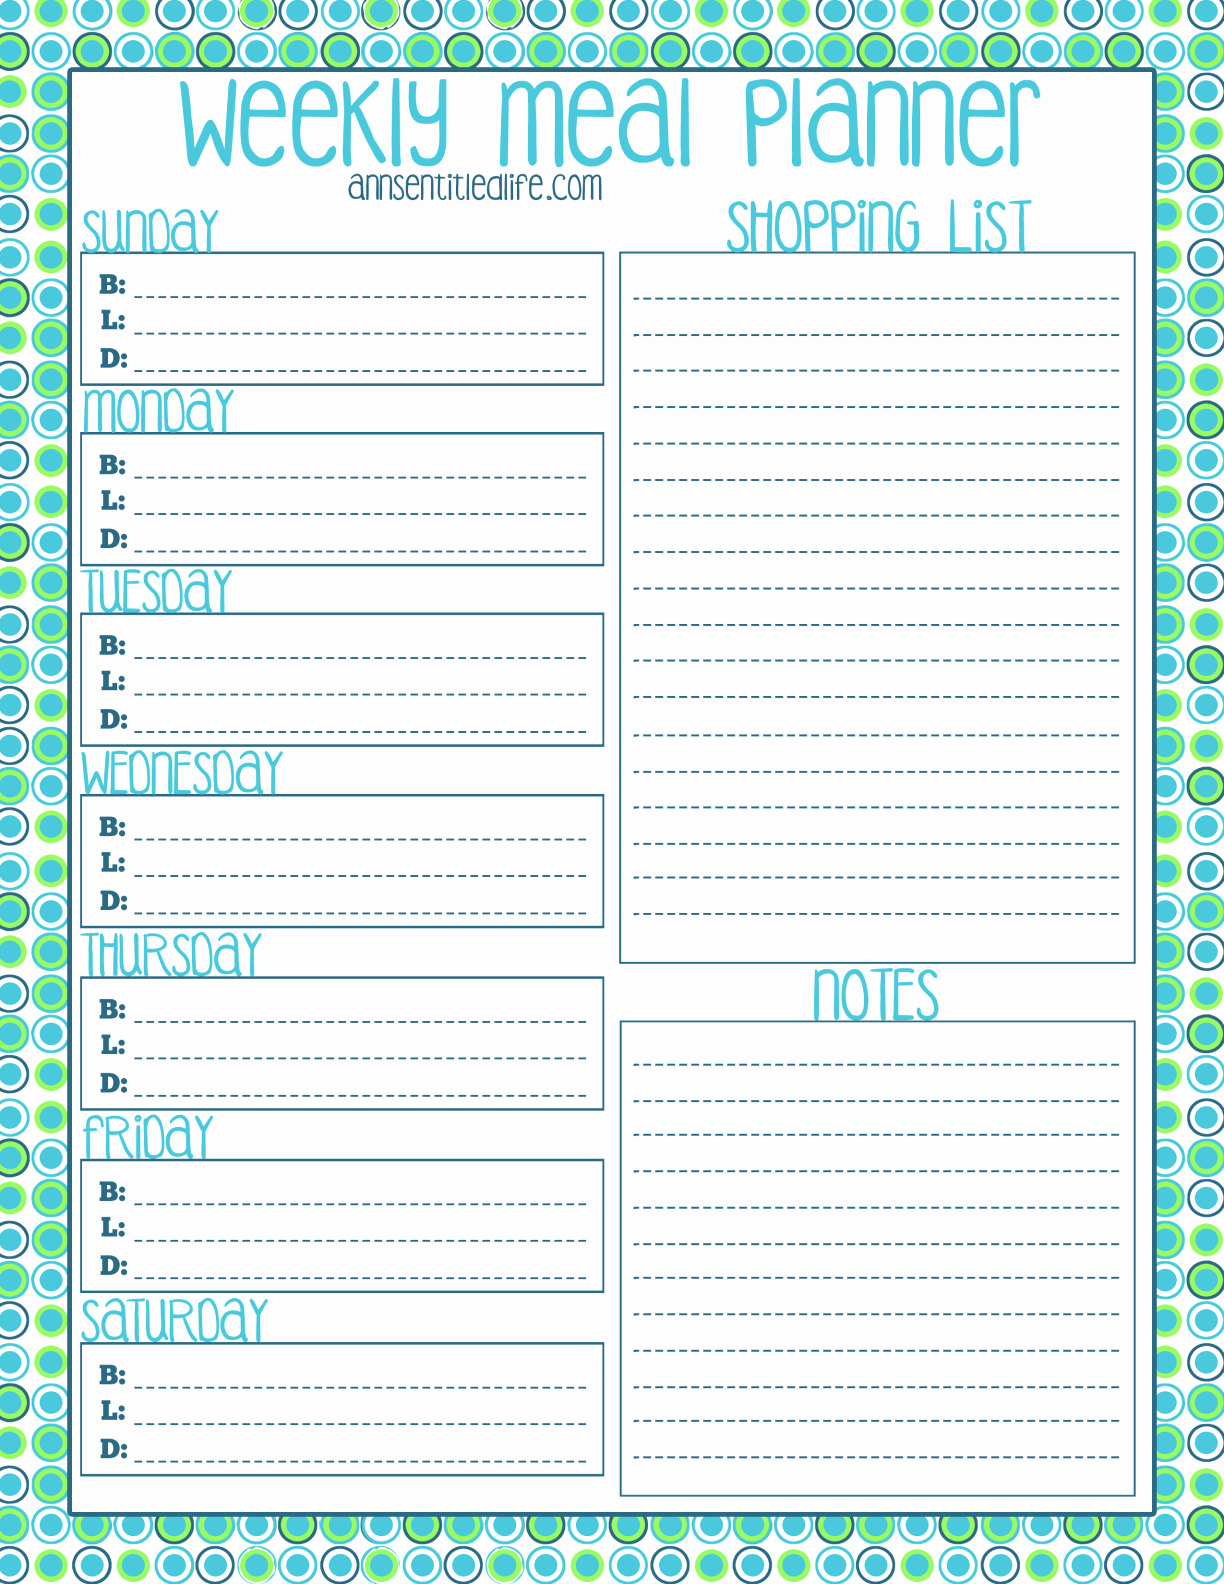 Free Meal Planner Template Download Unique Free Printable Recipe Card Meal Planner and Kitchen Labels